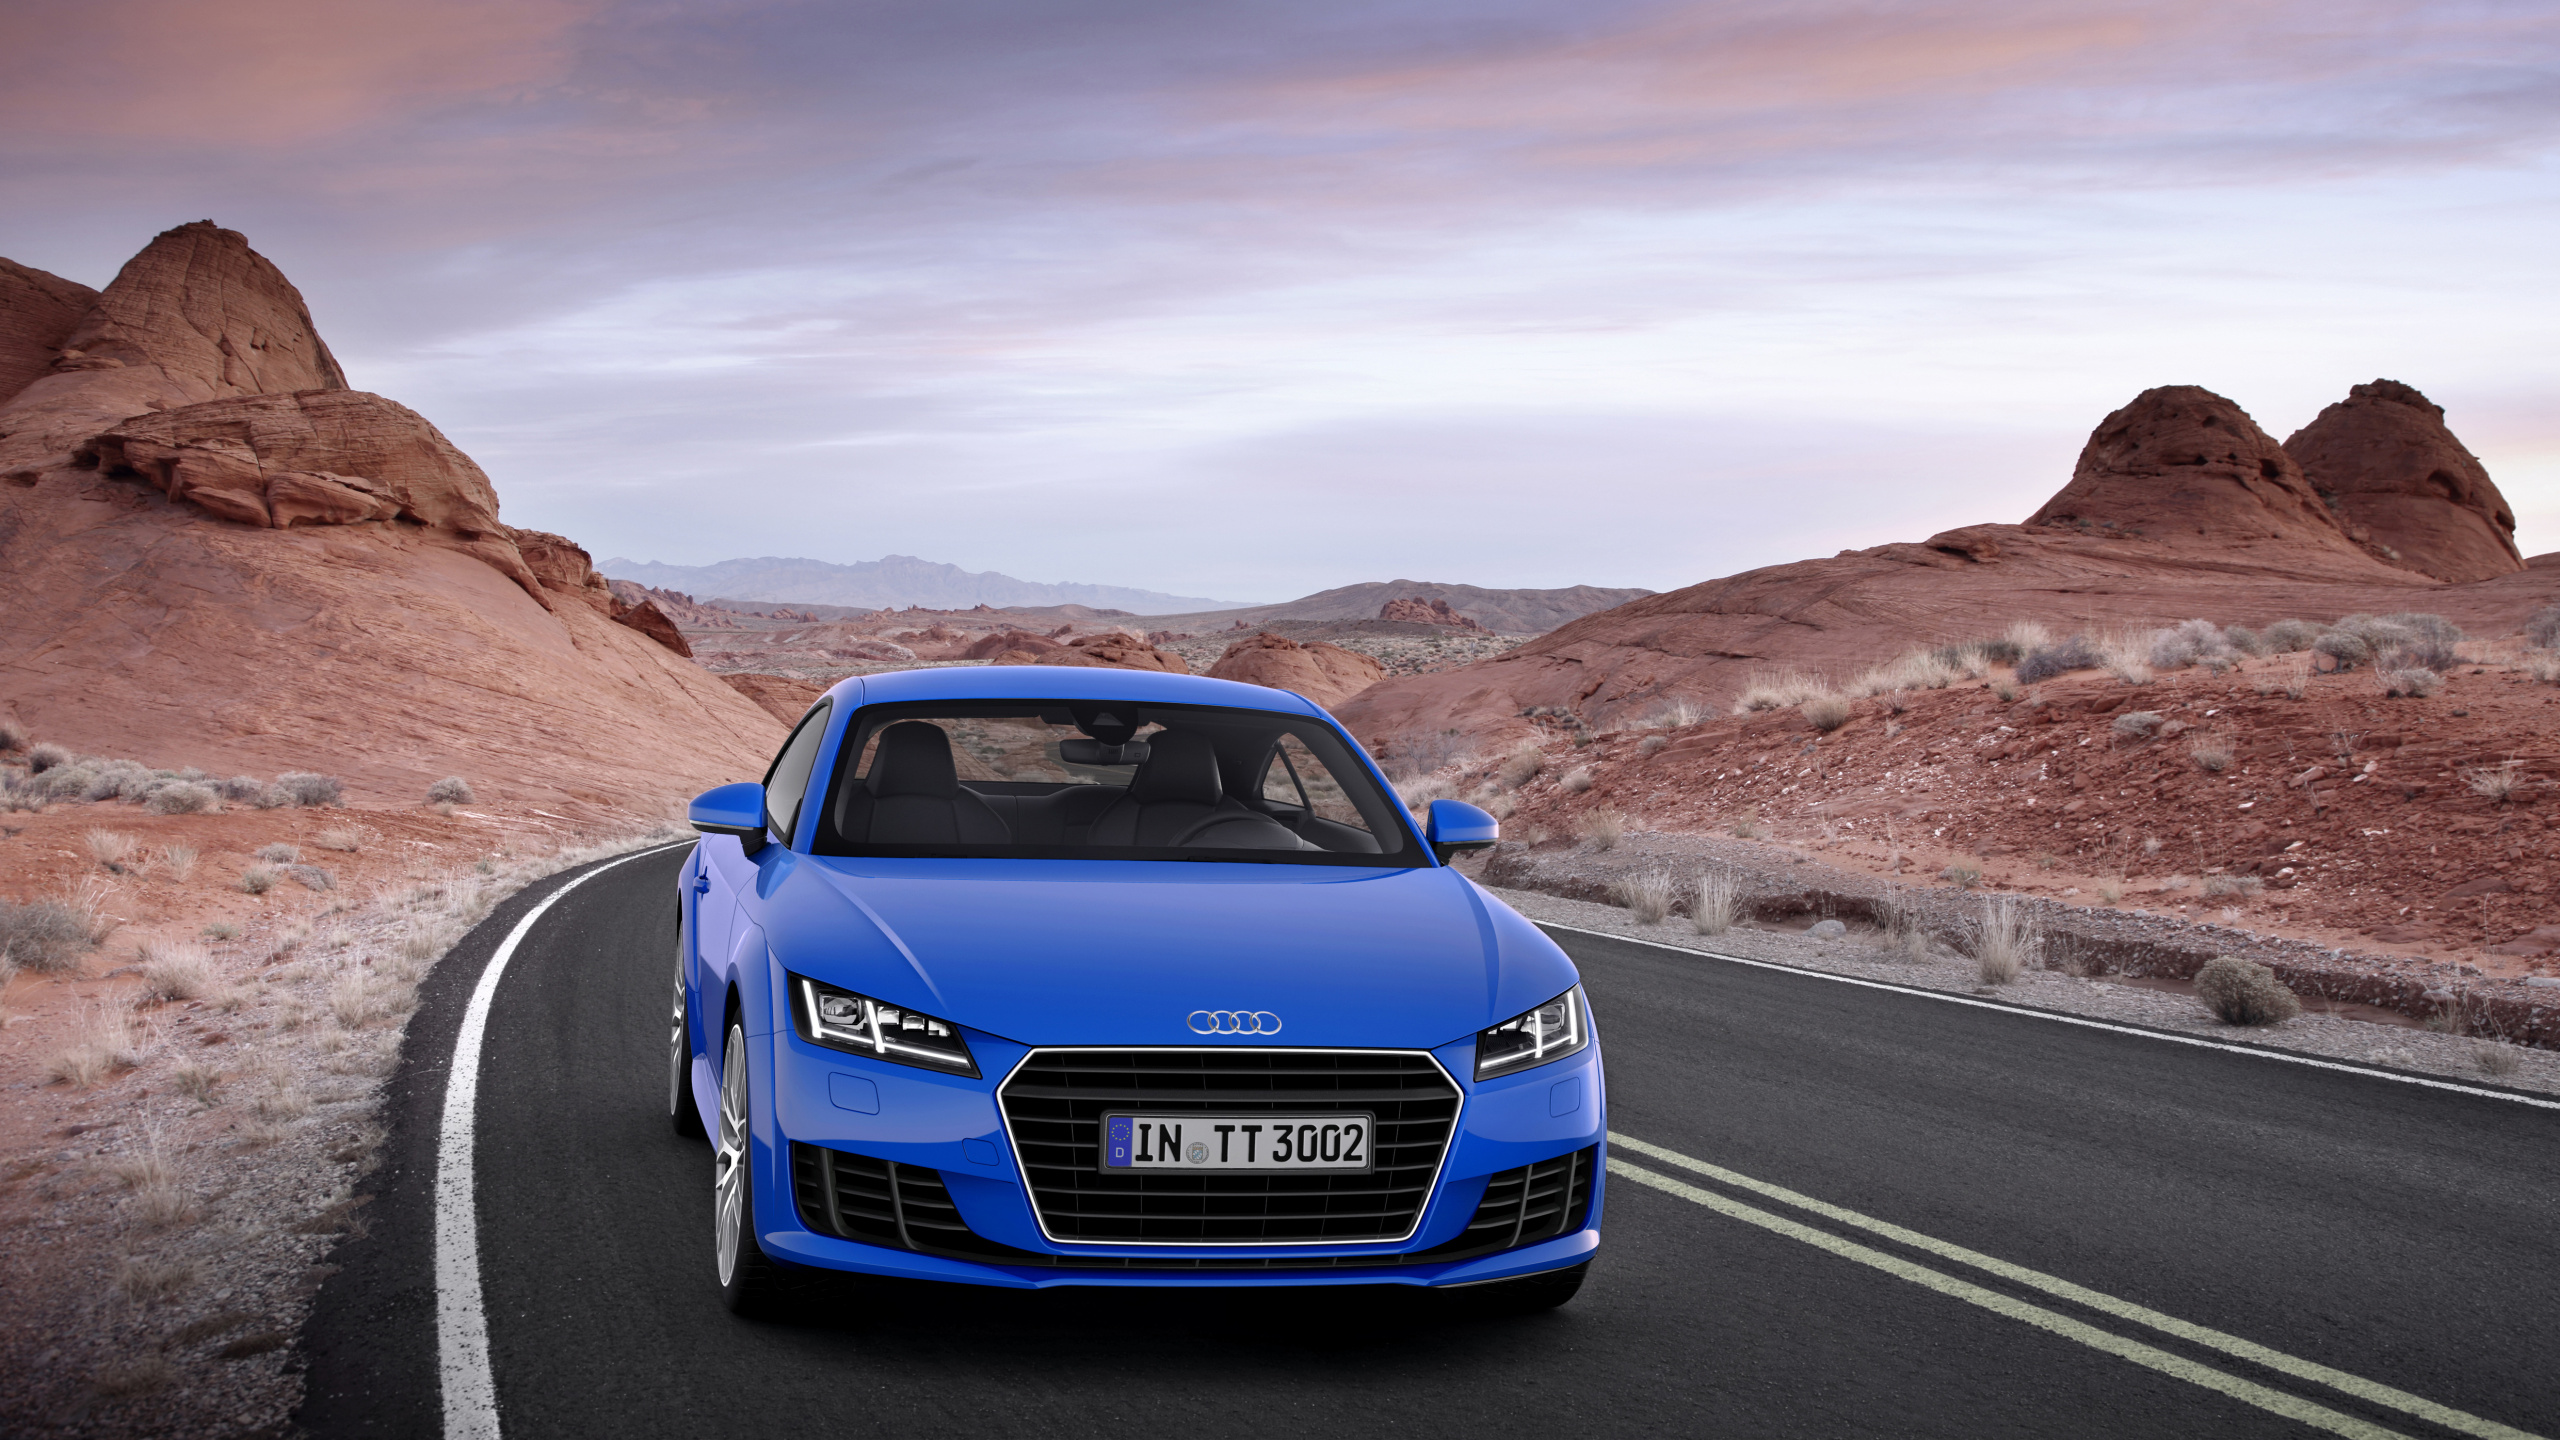 Blue Audi a 4 on Road During Daytime. Wallpaper in 2560x1440 Resolution